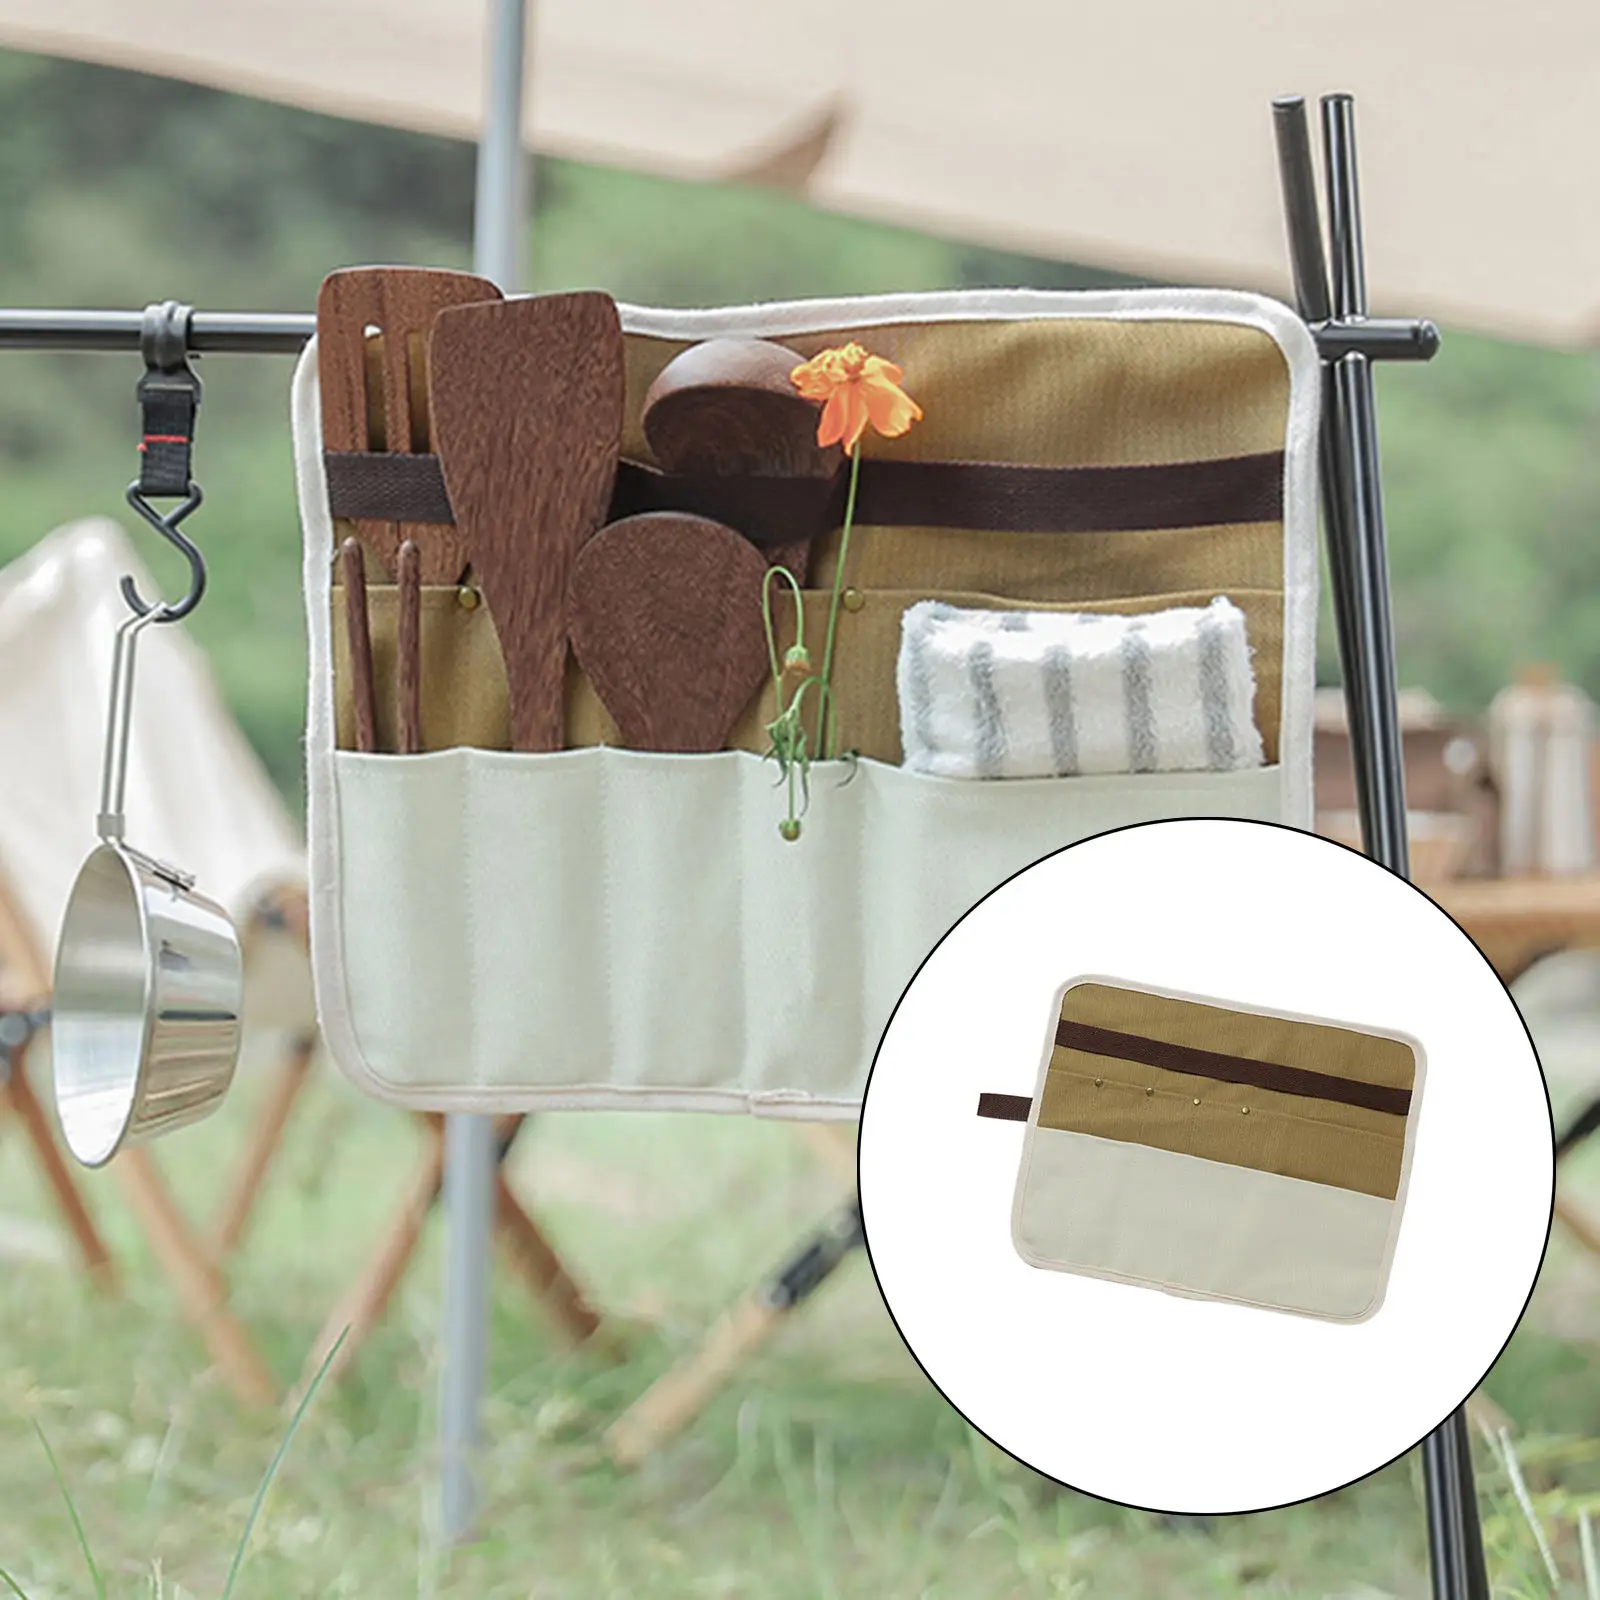 Tableware Storage Bag Flatware Cooking Utensils Canvas Portable Folding Carry Case Organizer for Outdoor Travel Picnic Camping